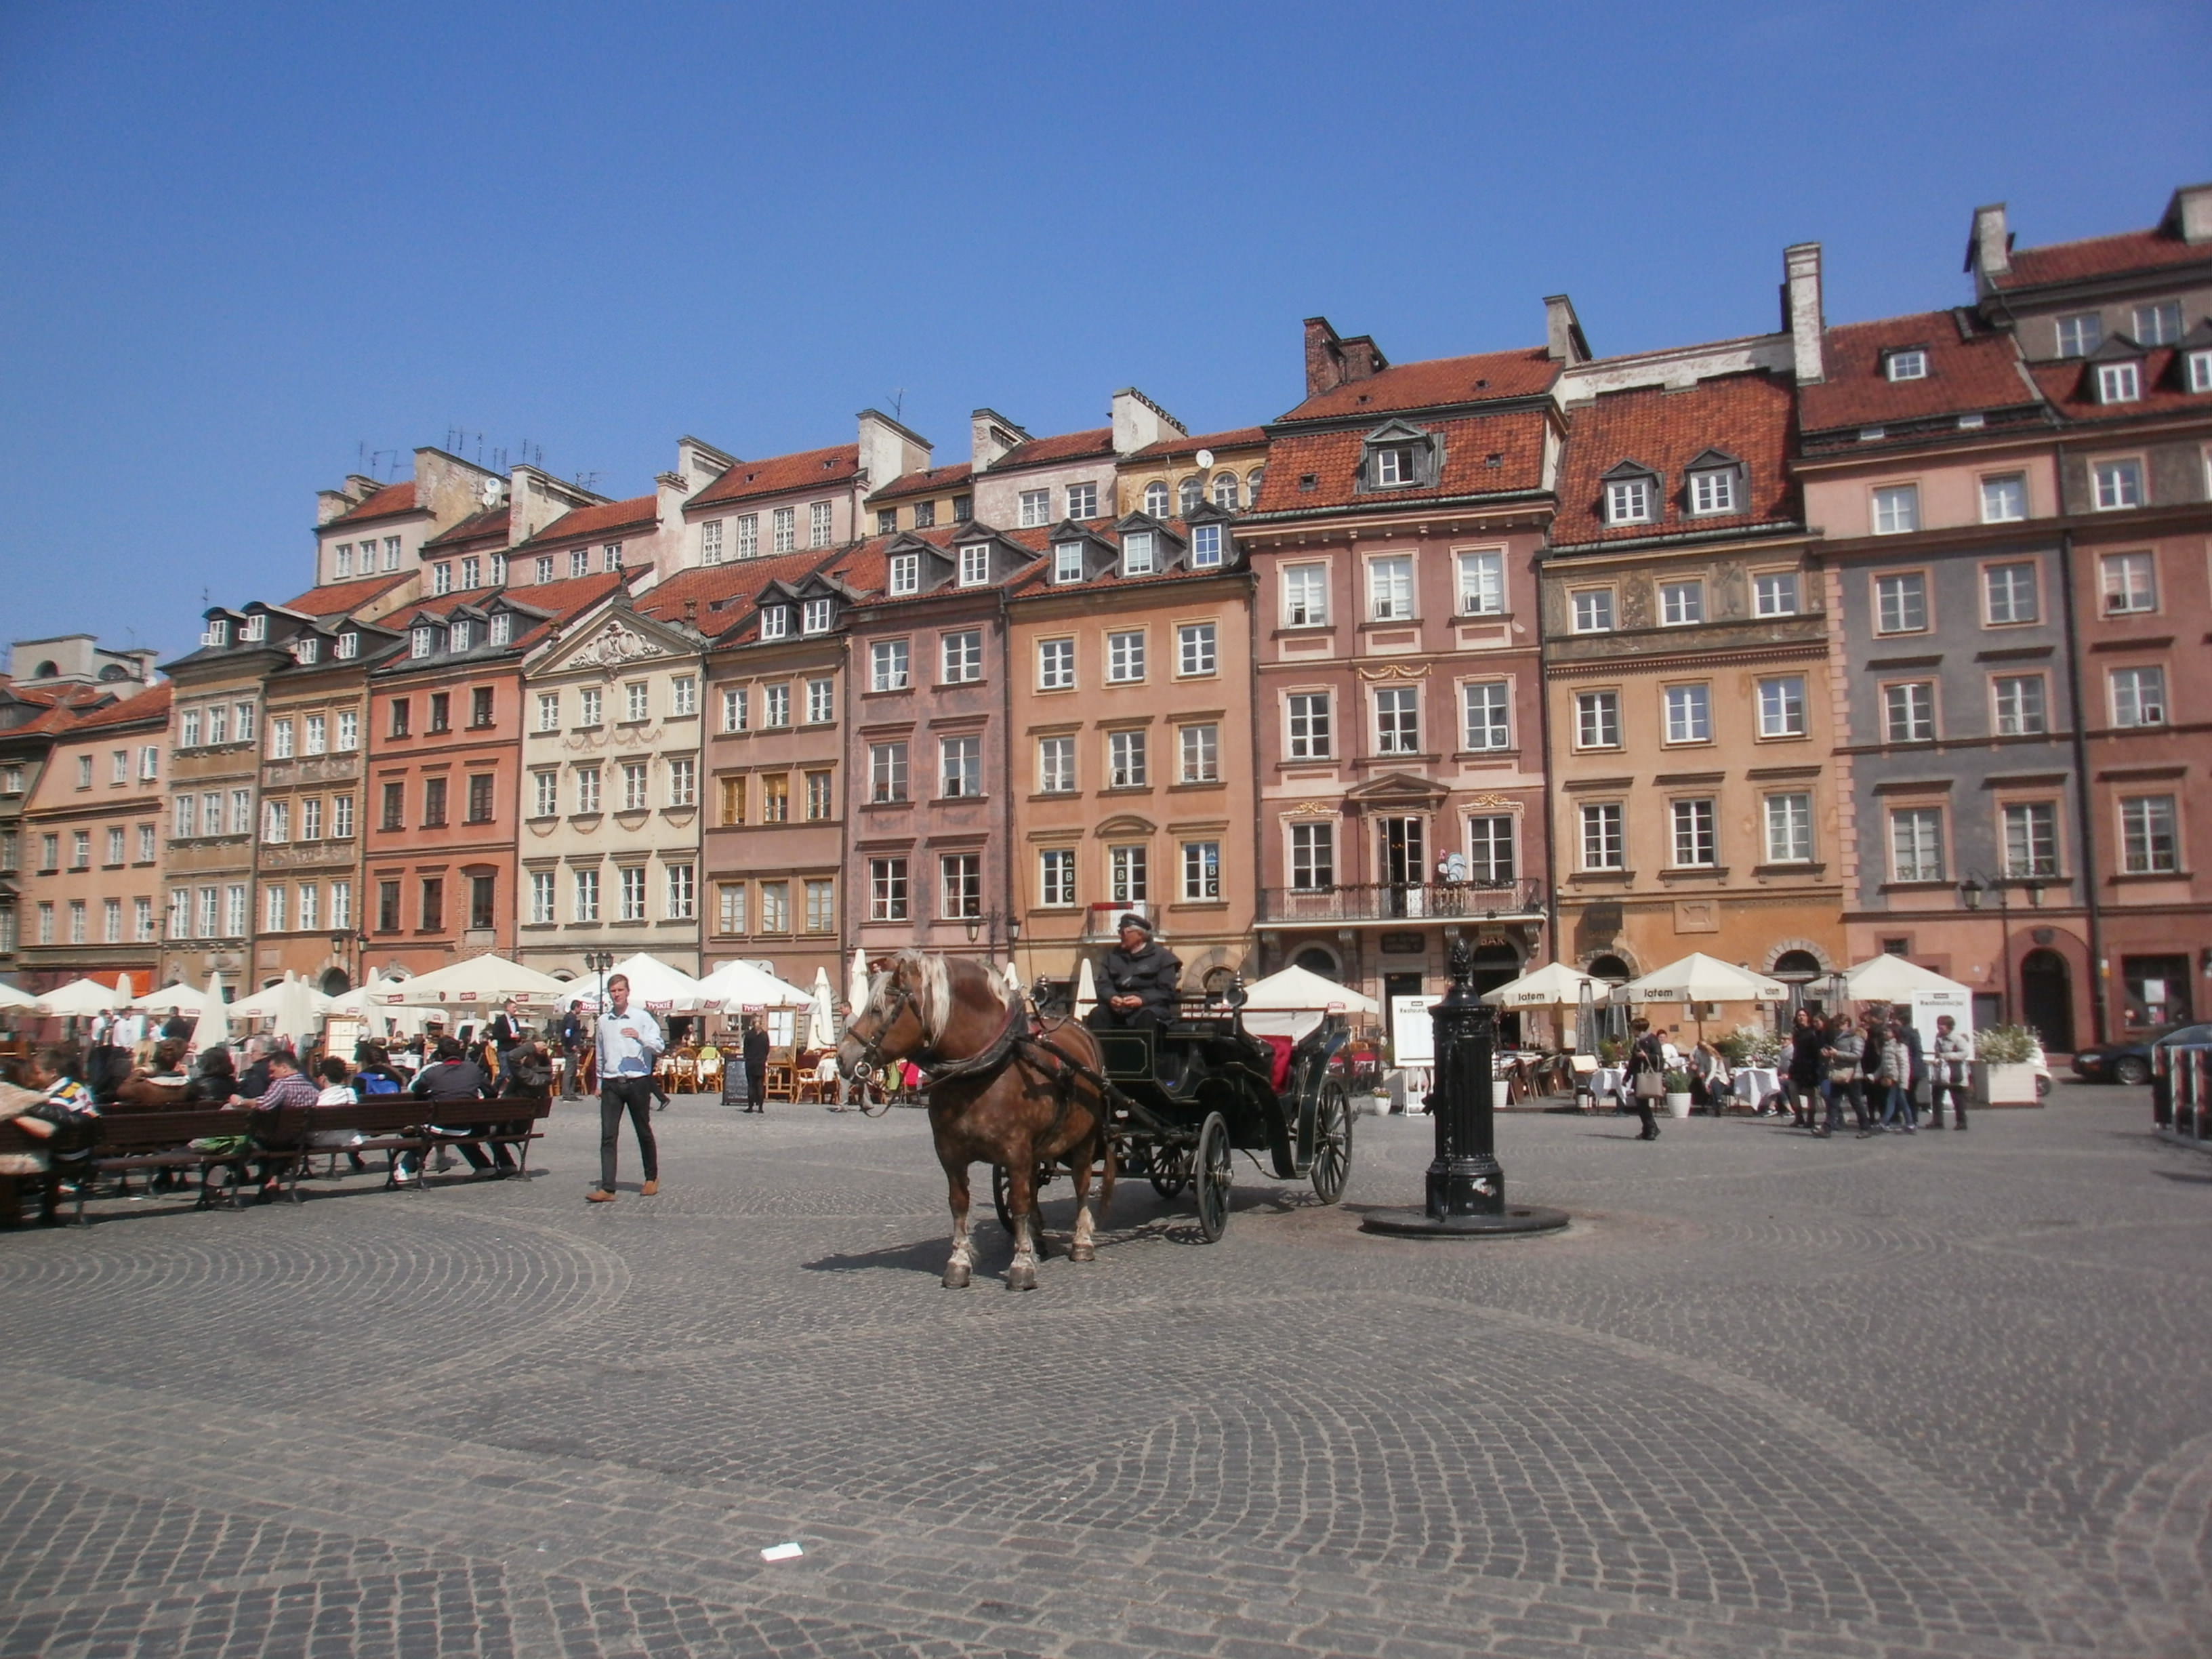 WARSAW - OLD TOWN MARKET SQUARE